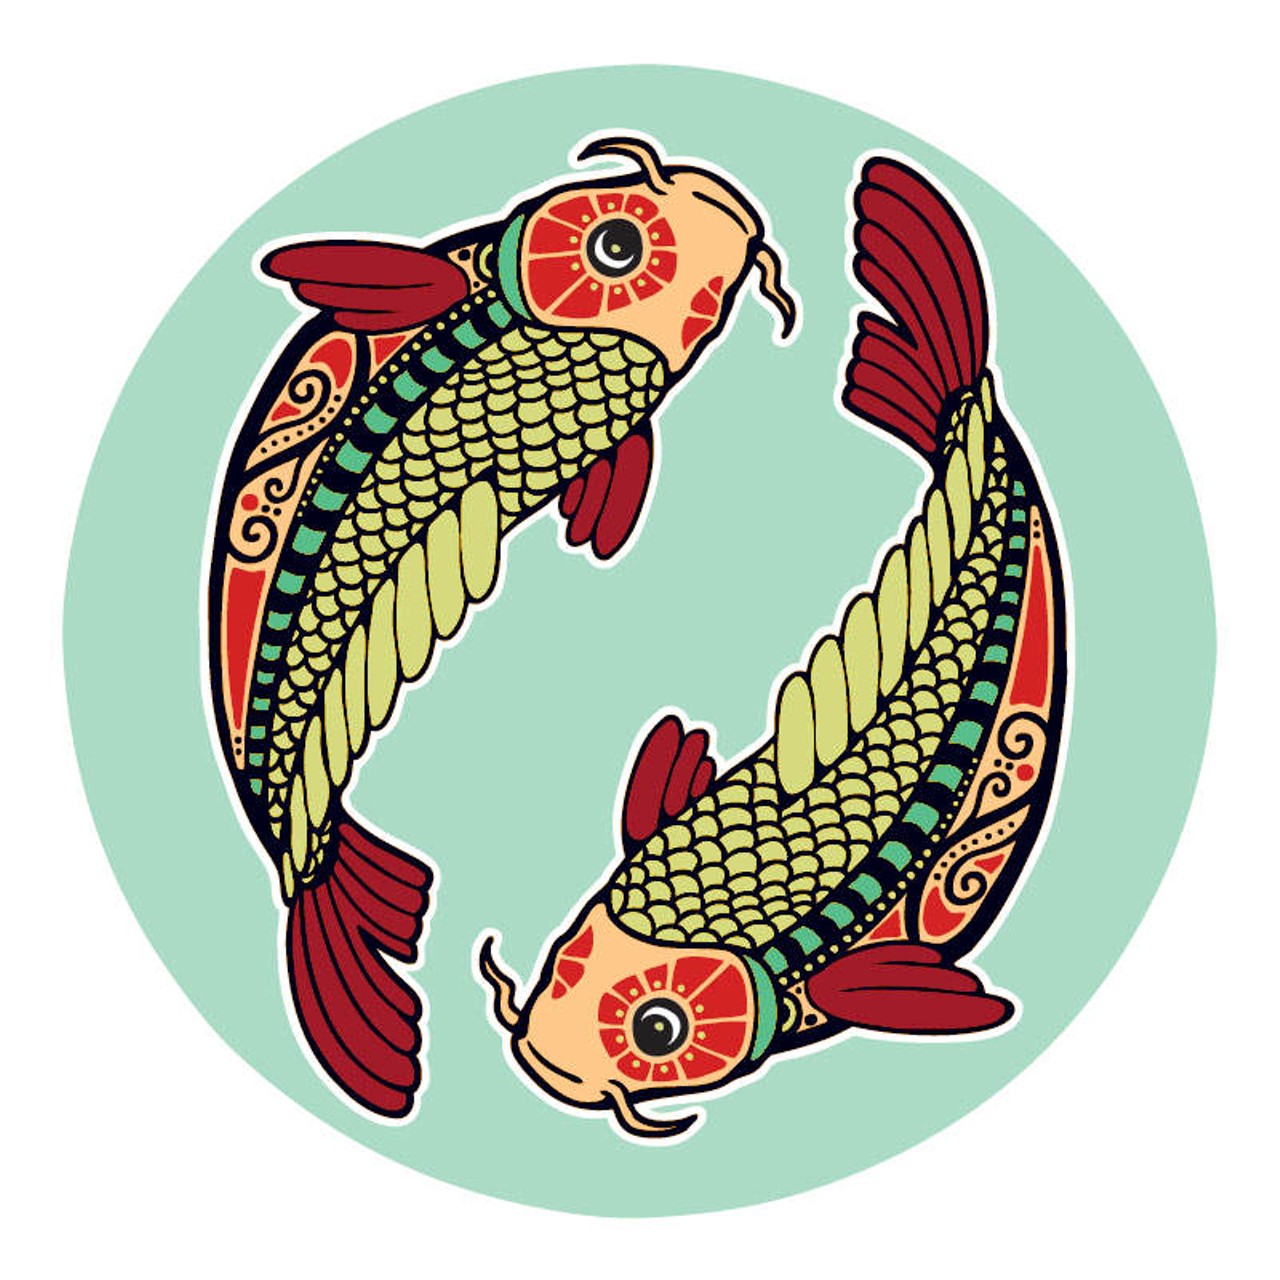 PISCES (Feb. 21-March 20): 
Now that you have a little more freedom and space, give yourself time to adjust to the idea that you are involved in a whole new ballgame. What took up so much of your energy in the past is now available to go where it really needs to go. If your whole life has led you to this point, it looks to me like you are about to turn into a supernova. One way or another, with all the pressure off, you are coming into your own. As this happens there is bound to be a major test that opens you up to your true abilities and to the idea that love is the key, and that it always finds a way.